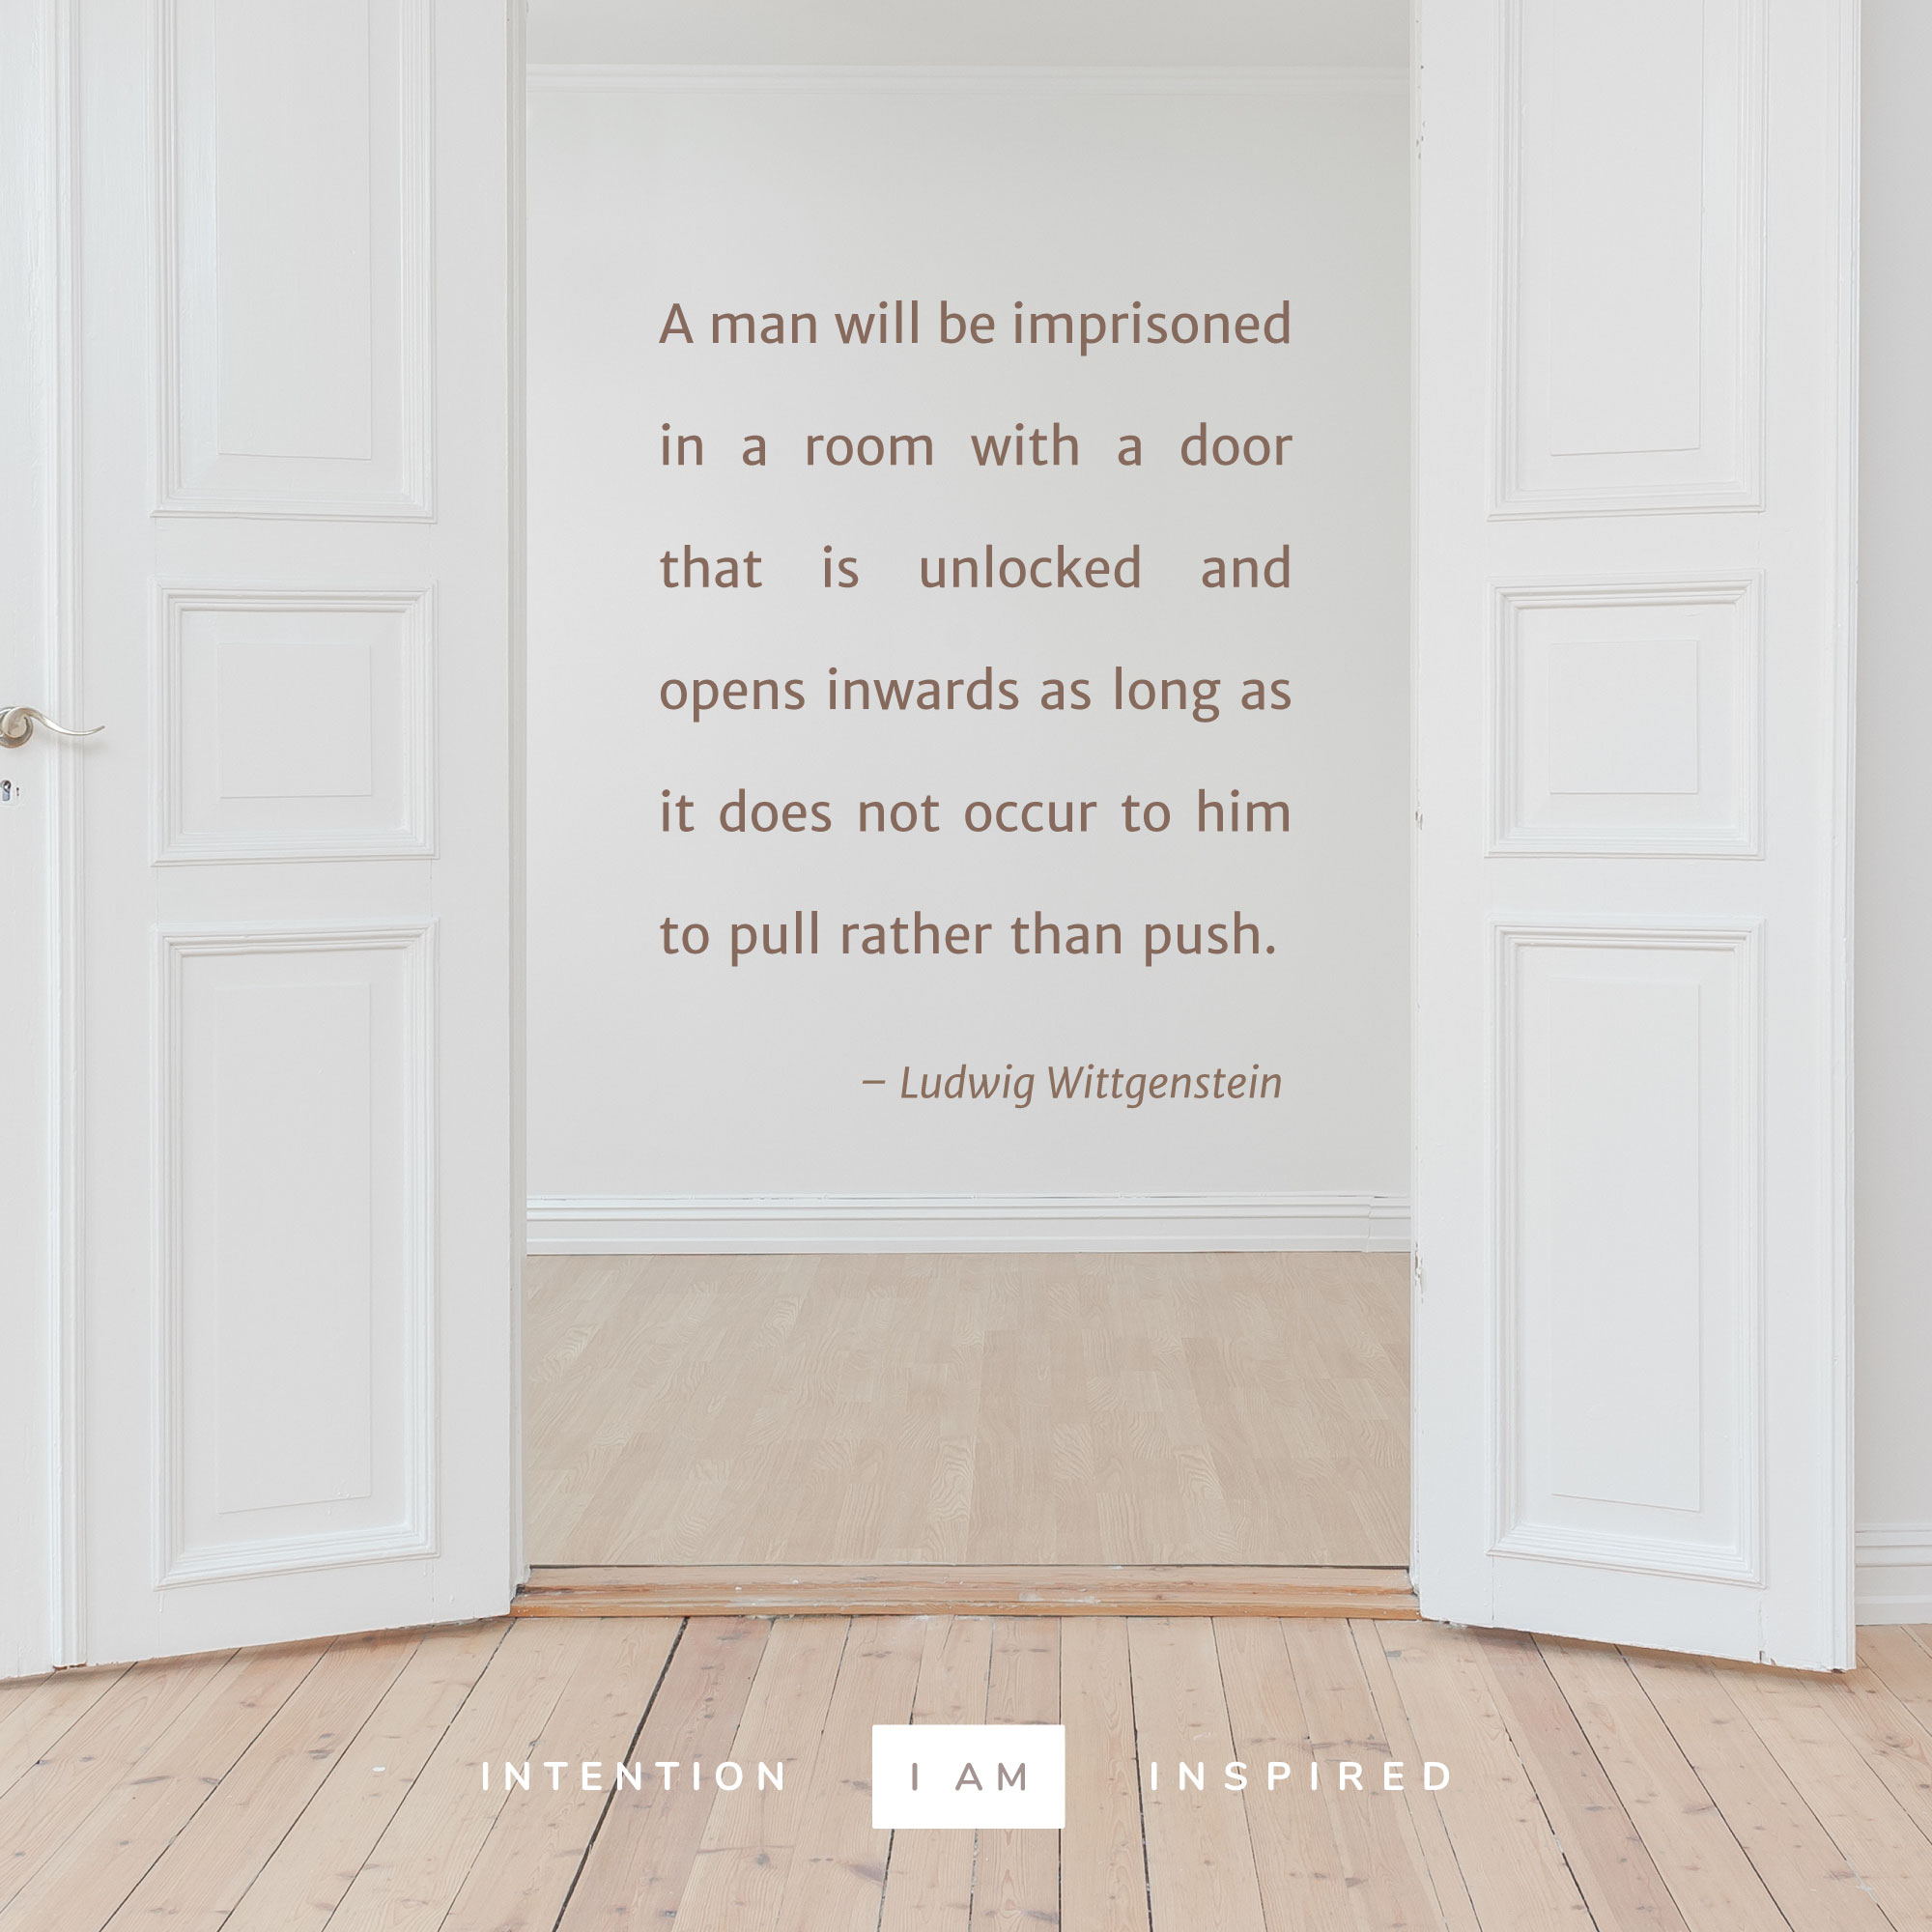 A man will be imprisoned in a room with a door that is unlocked and opens inwards as long as it does not occur to him to pull rather than push.